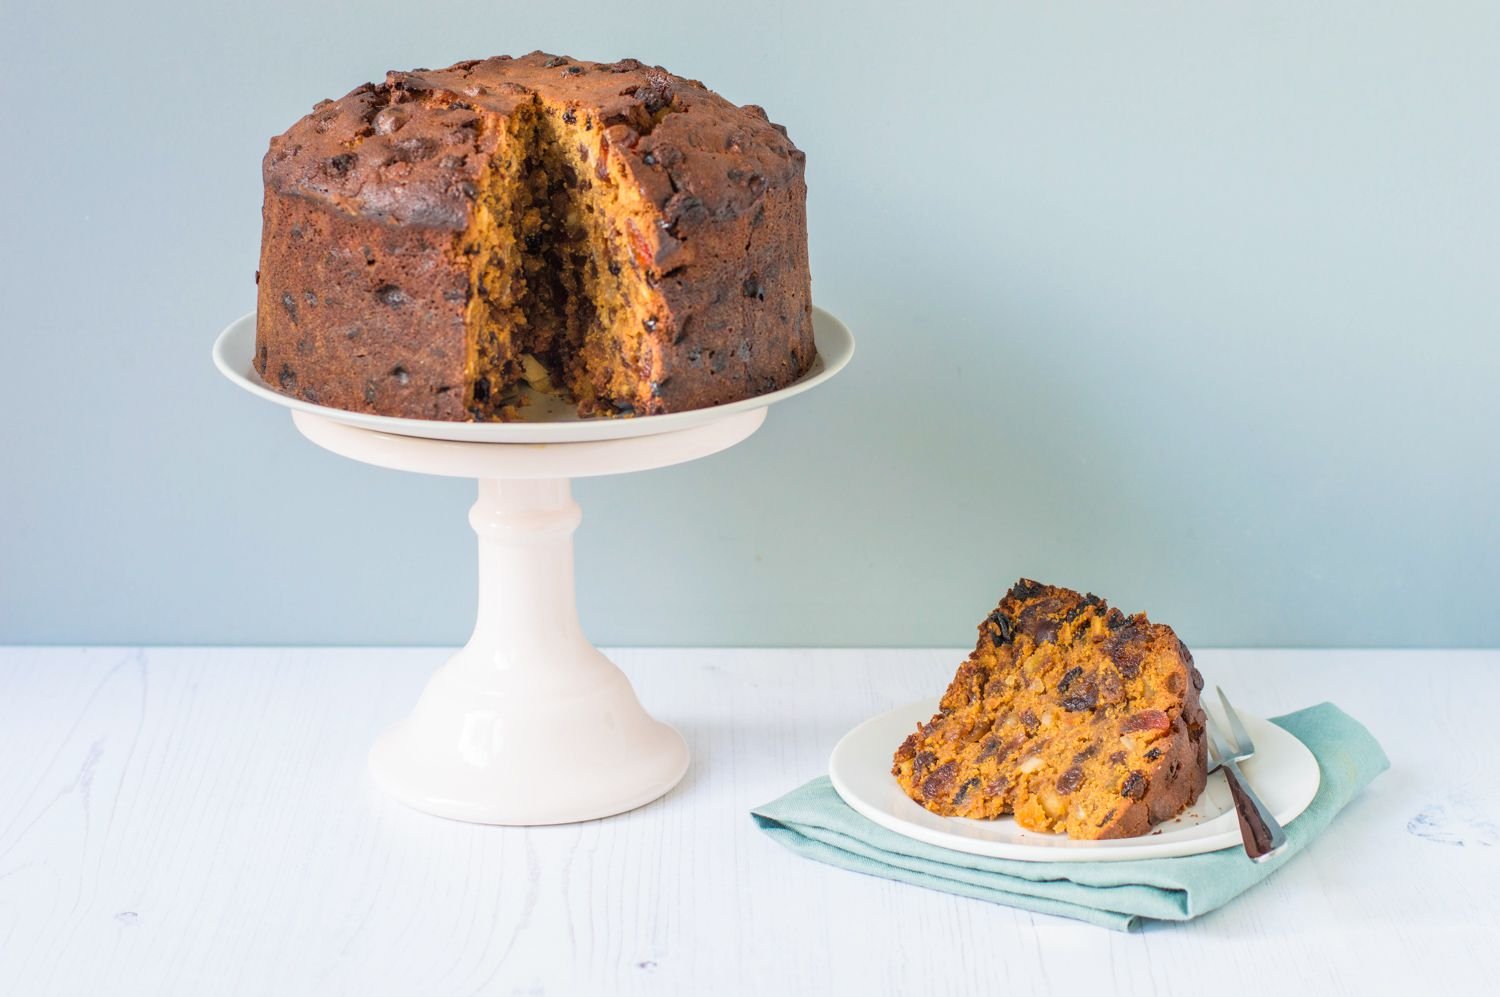 11 Steps to a Traditional British Rich Fruitcake